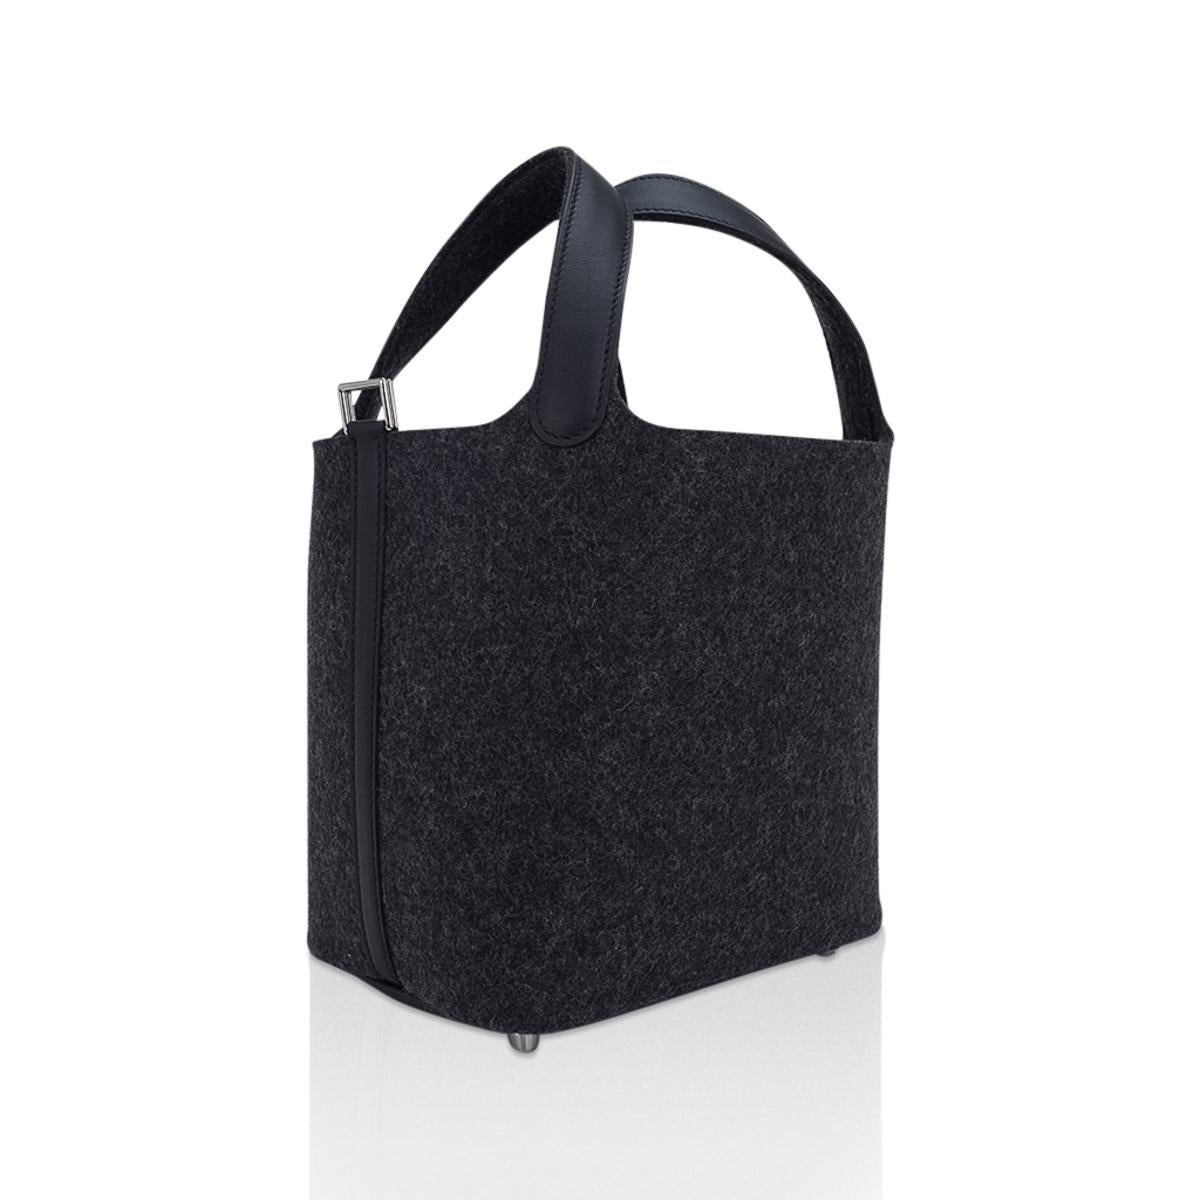 Mightychic offers a limited edition Hermes Picotin Lock Touch 18 tote bag featured in Charcoal Grey Feutre and Black Swift leather.
The handles straps are Swift. 
The body of the bag and exterior handles are Grey Feutre (Wool) with Palladium